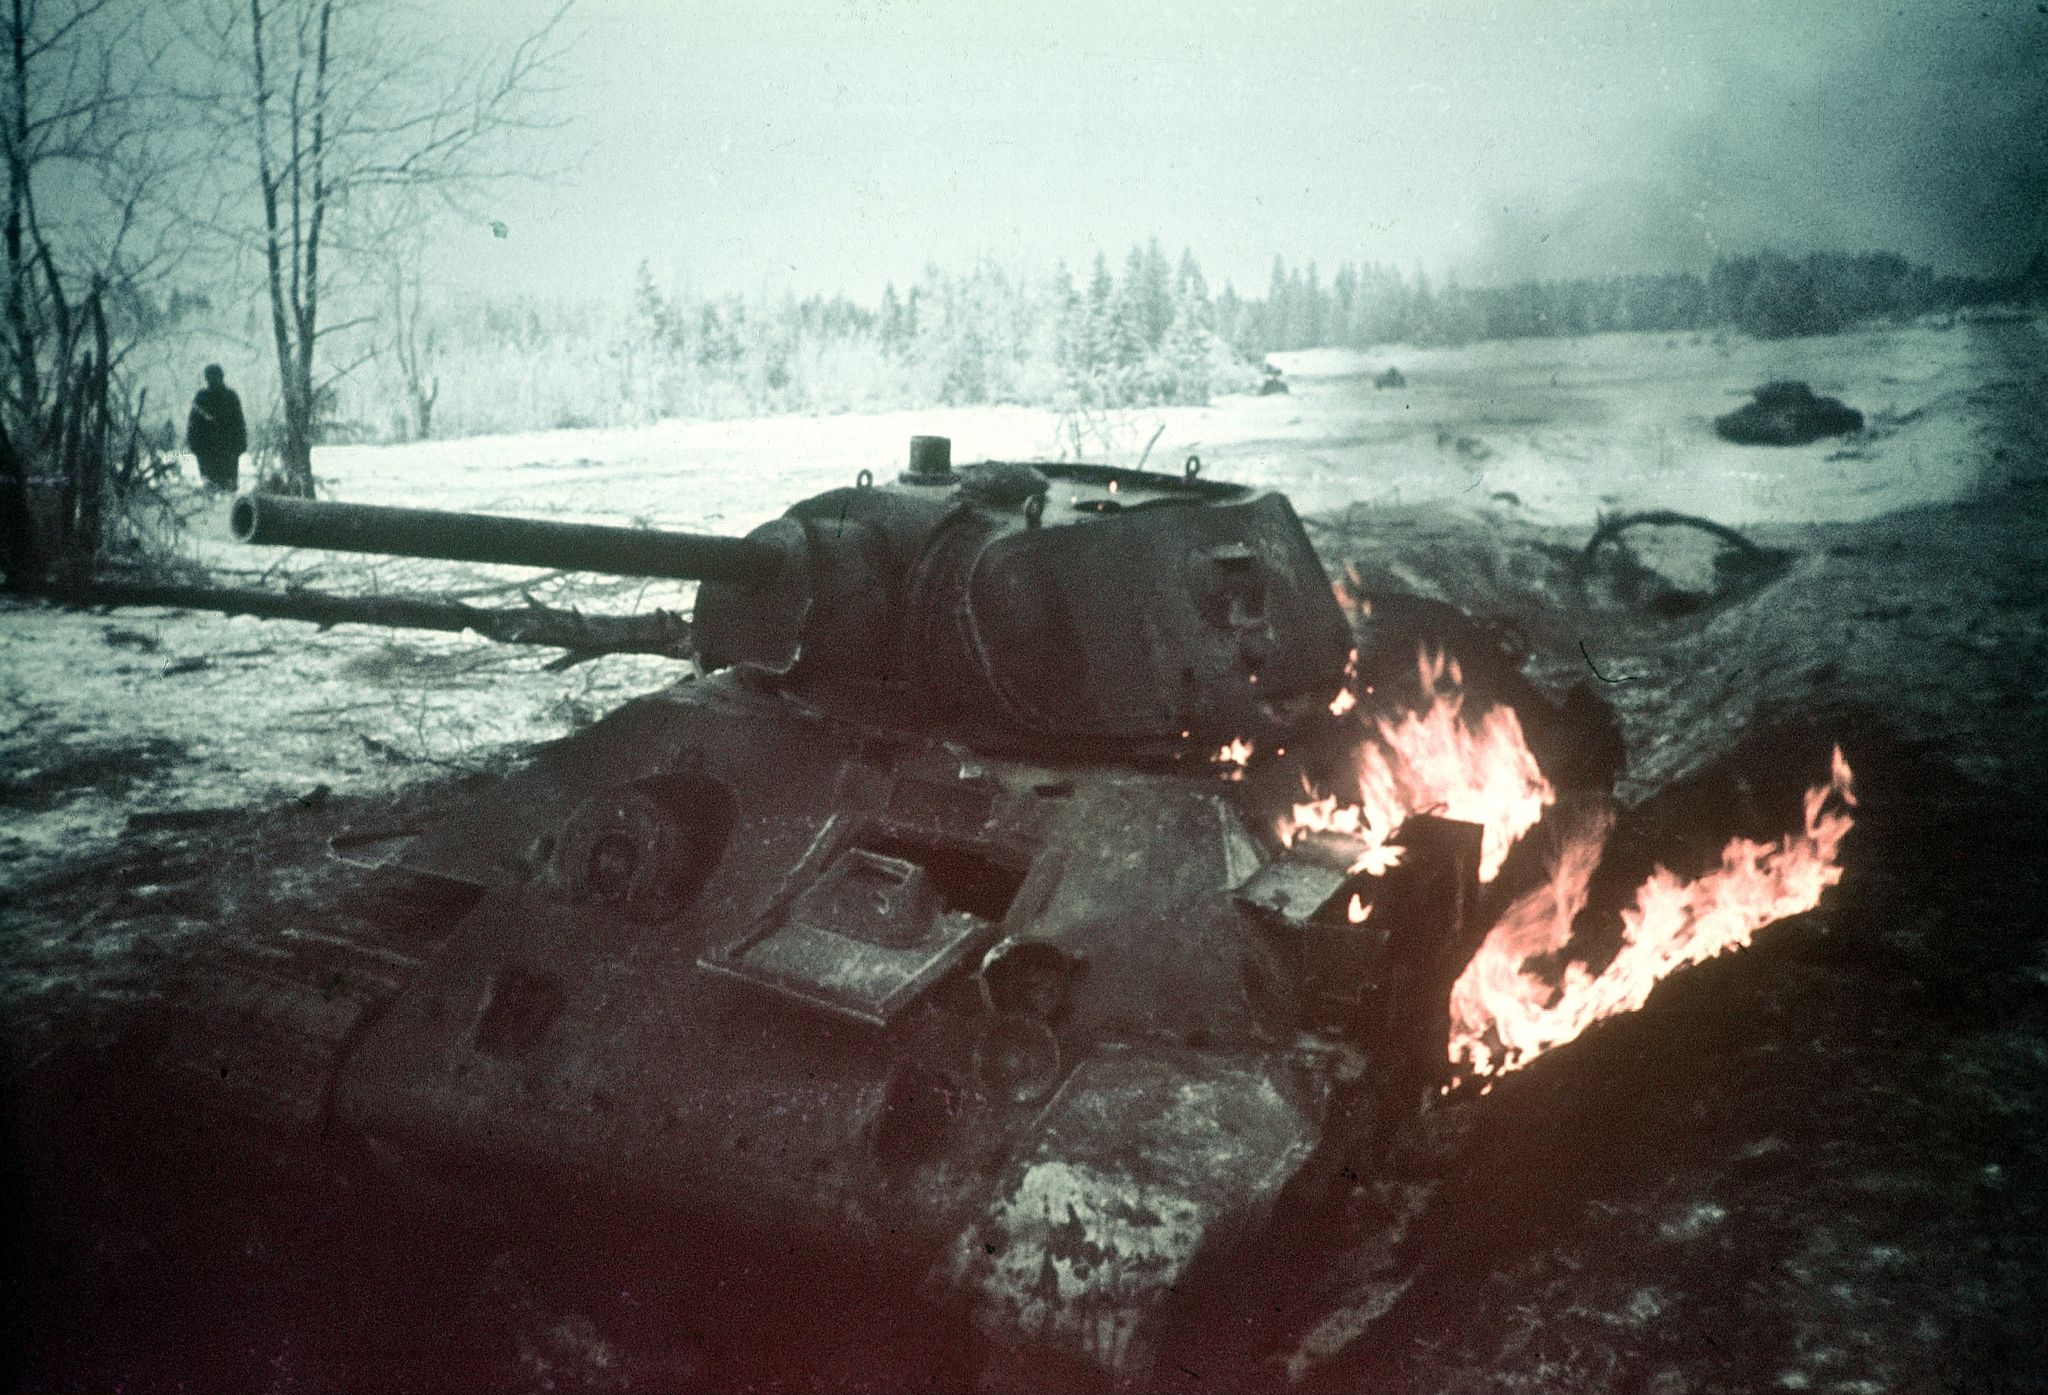 world war ii german forces repel a soviet tank attack in the foreground a hit, burning t 34 tank   no place given   early or late 1943 winter   photographer artur grimm  